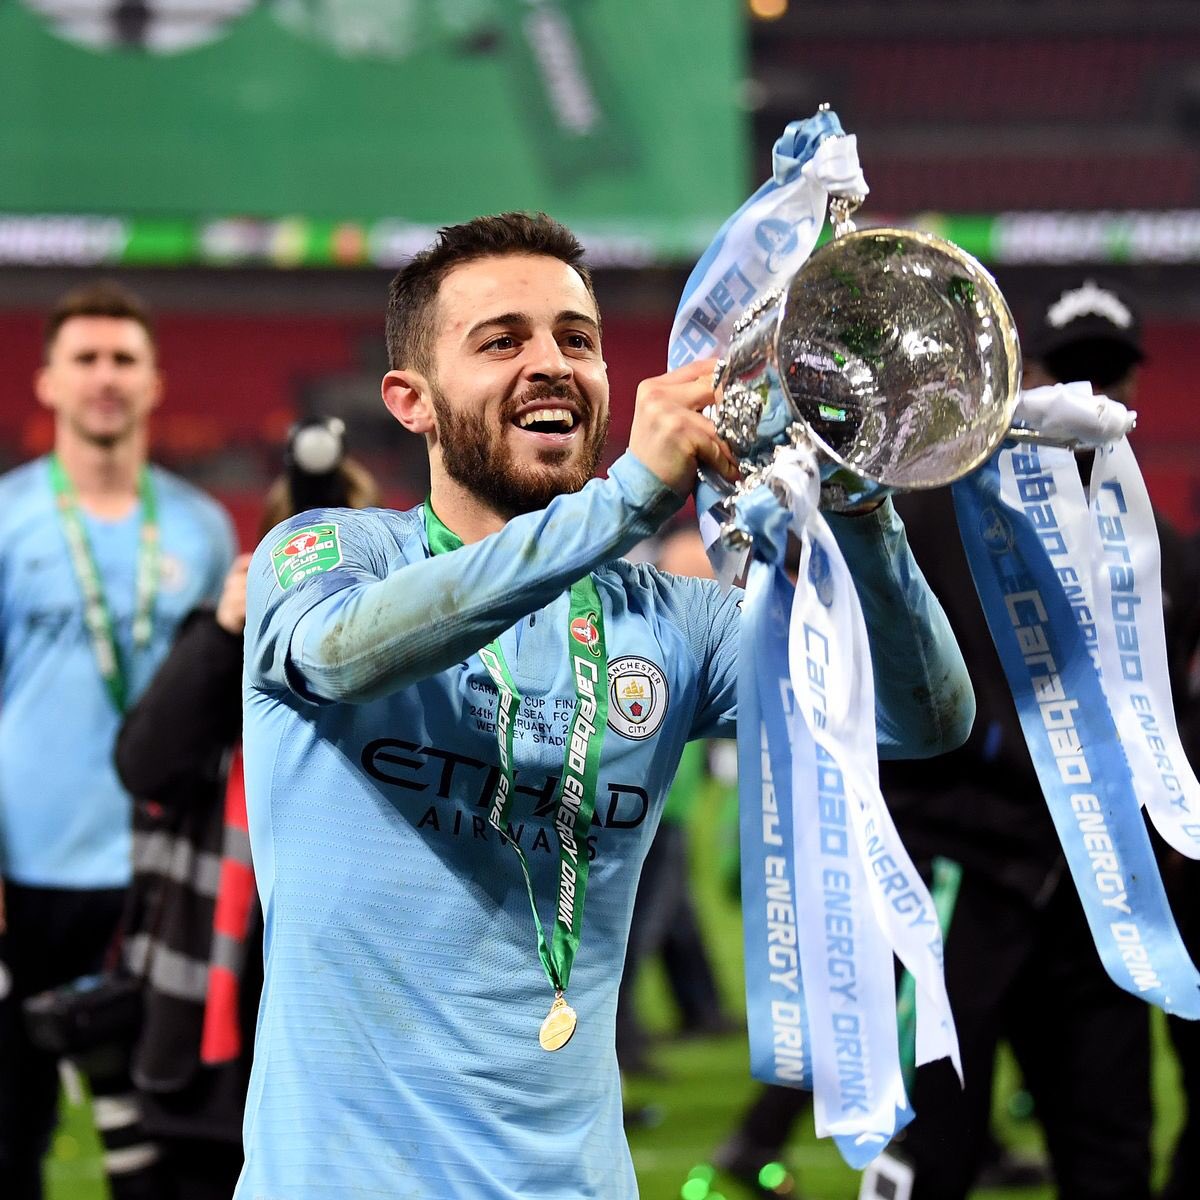 Bernardo was City’s best player imo, in our most successful season where we won the domestic Treble.Bernardo won us many games with some key moments, memorably against United away.Bernardo also won Etihad POTM for December 2018 & March 2019 as well as Etihad POTS for 18/19.